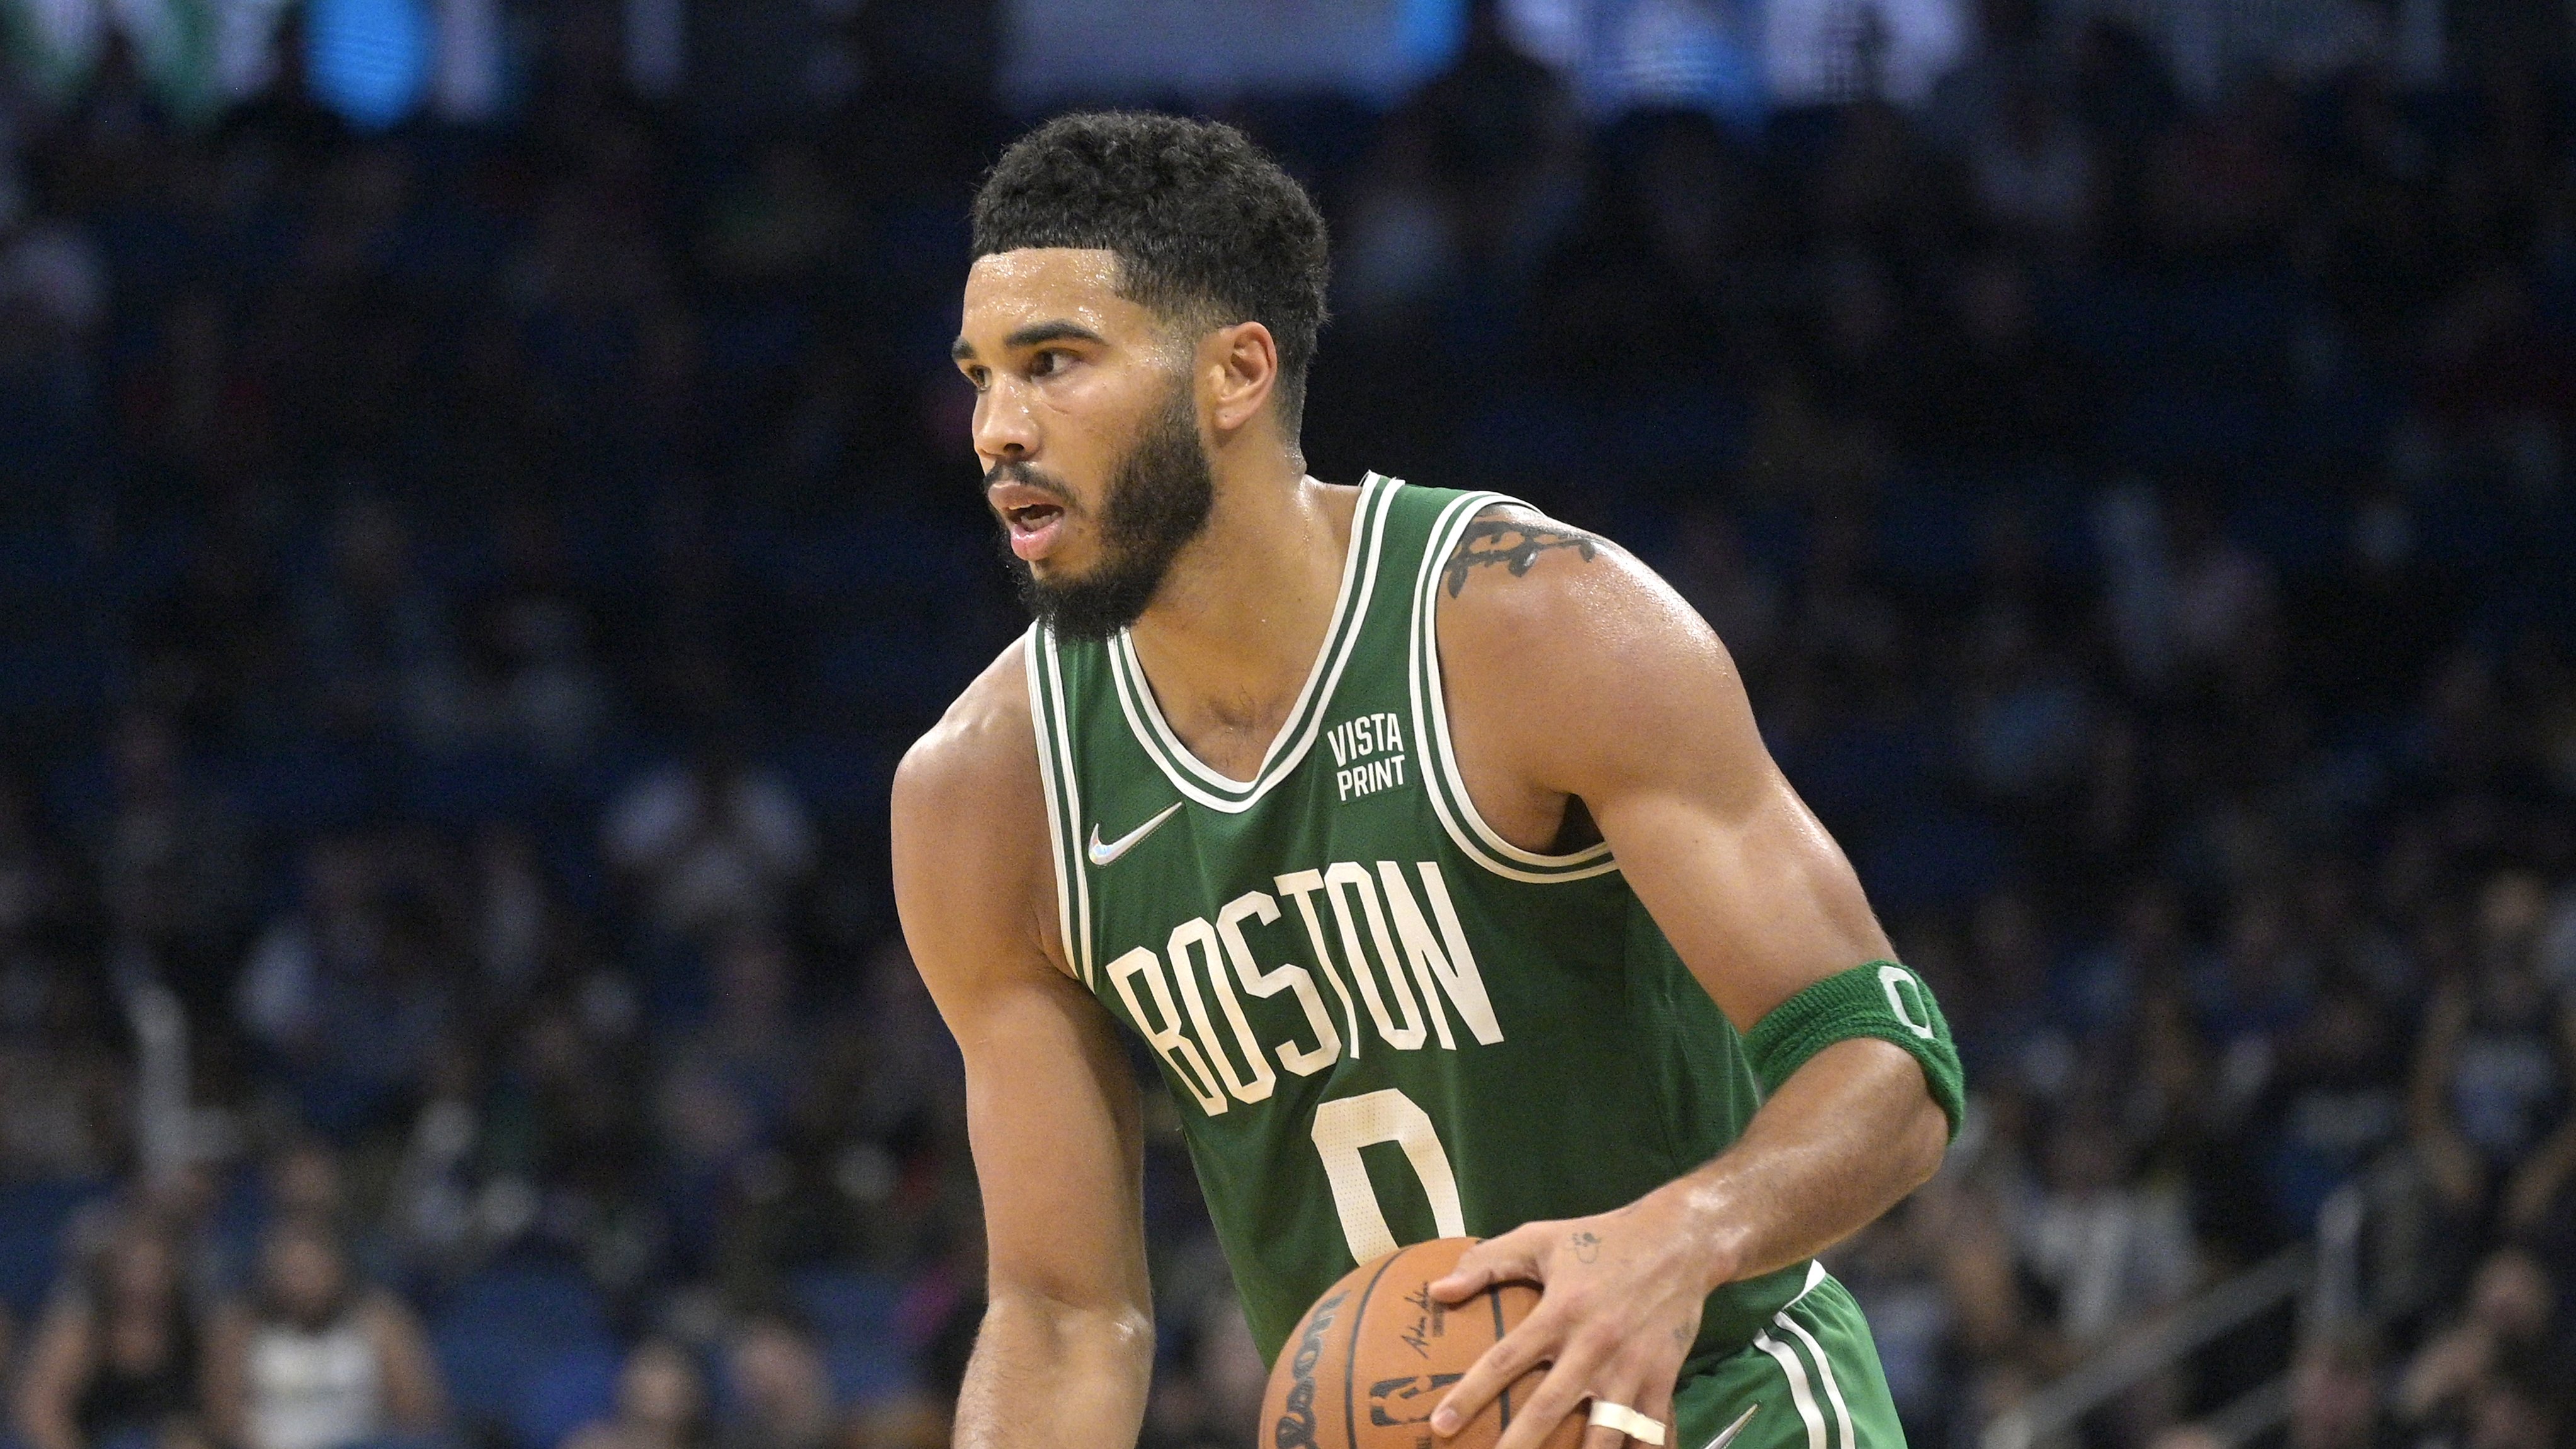 Celtics Jayson Tatum on hand issues: “I have a lot of s*** going